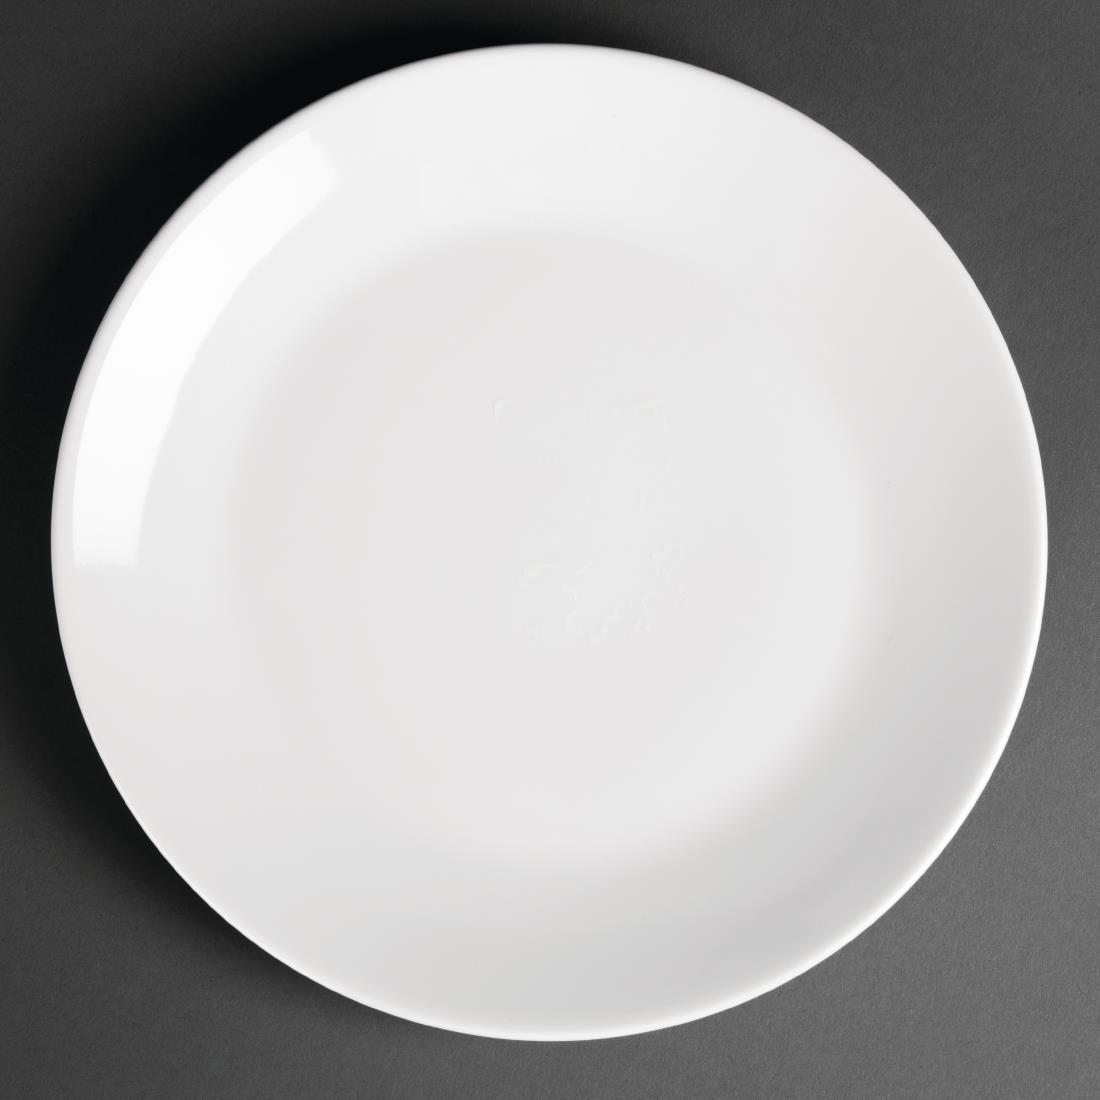 Royal Porcelain Classic White Coupe Plates 150mm (Pack of 12) - CG001  - 1